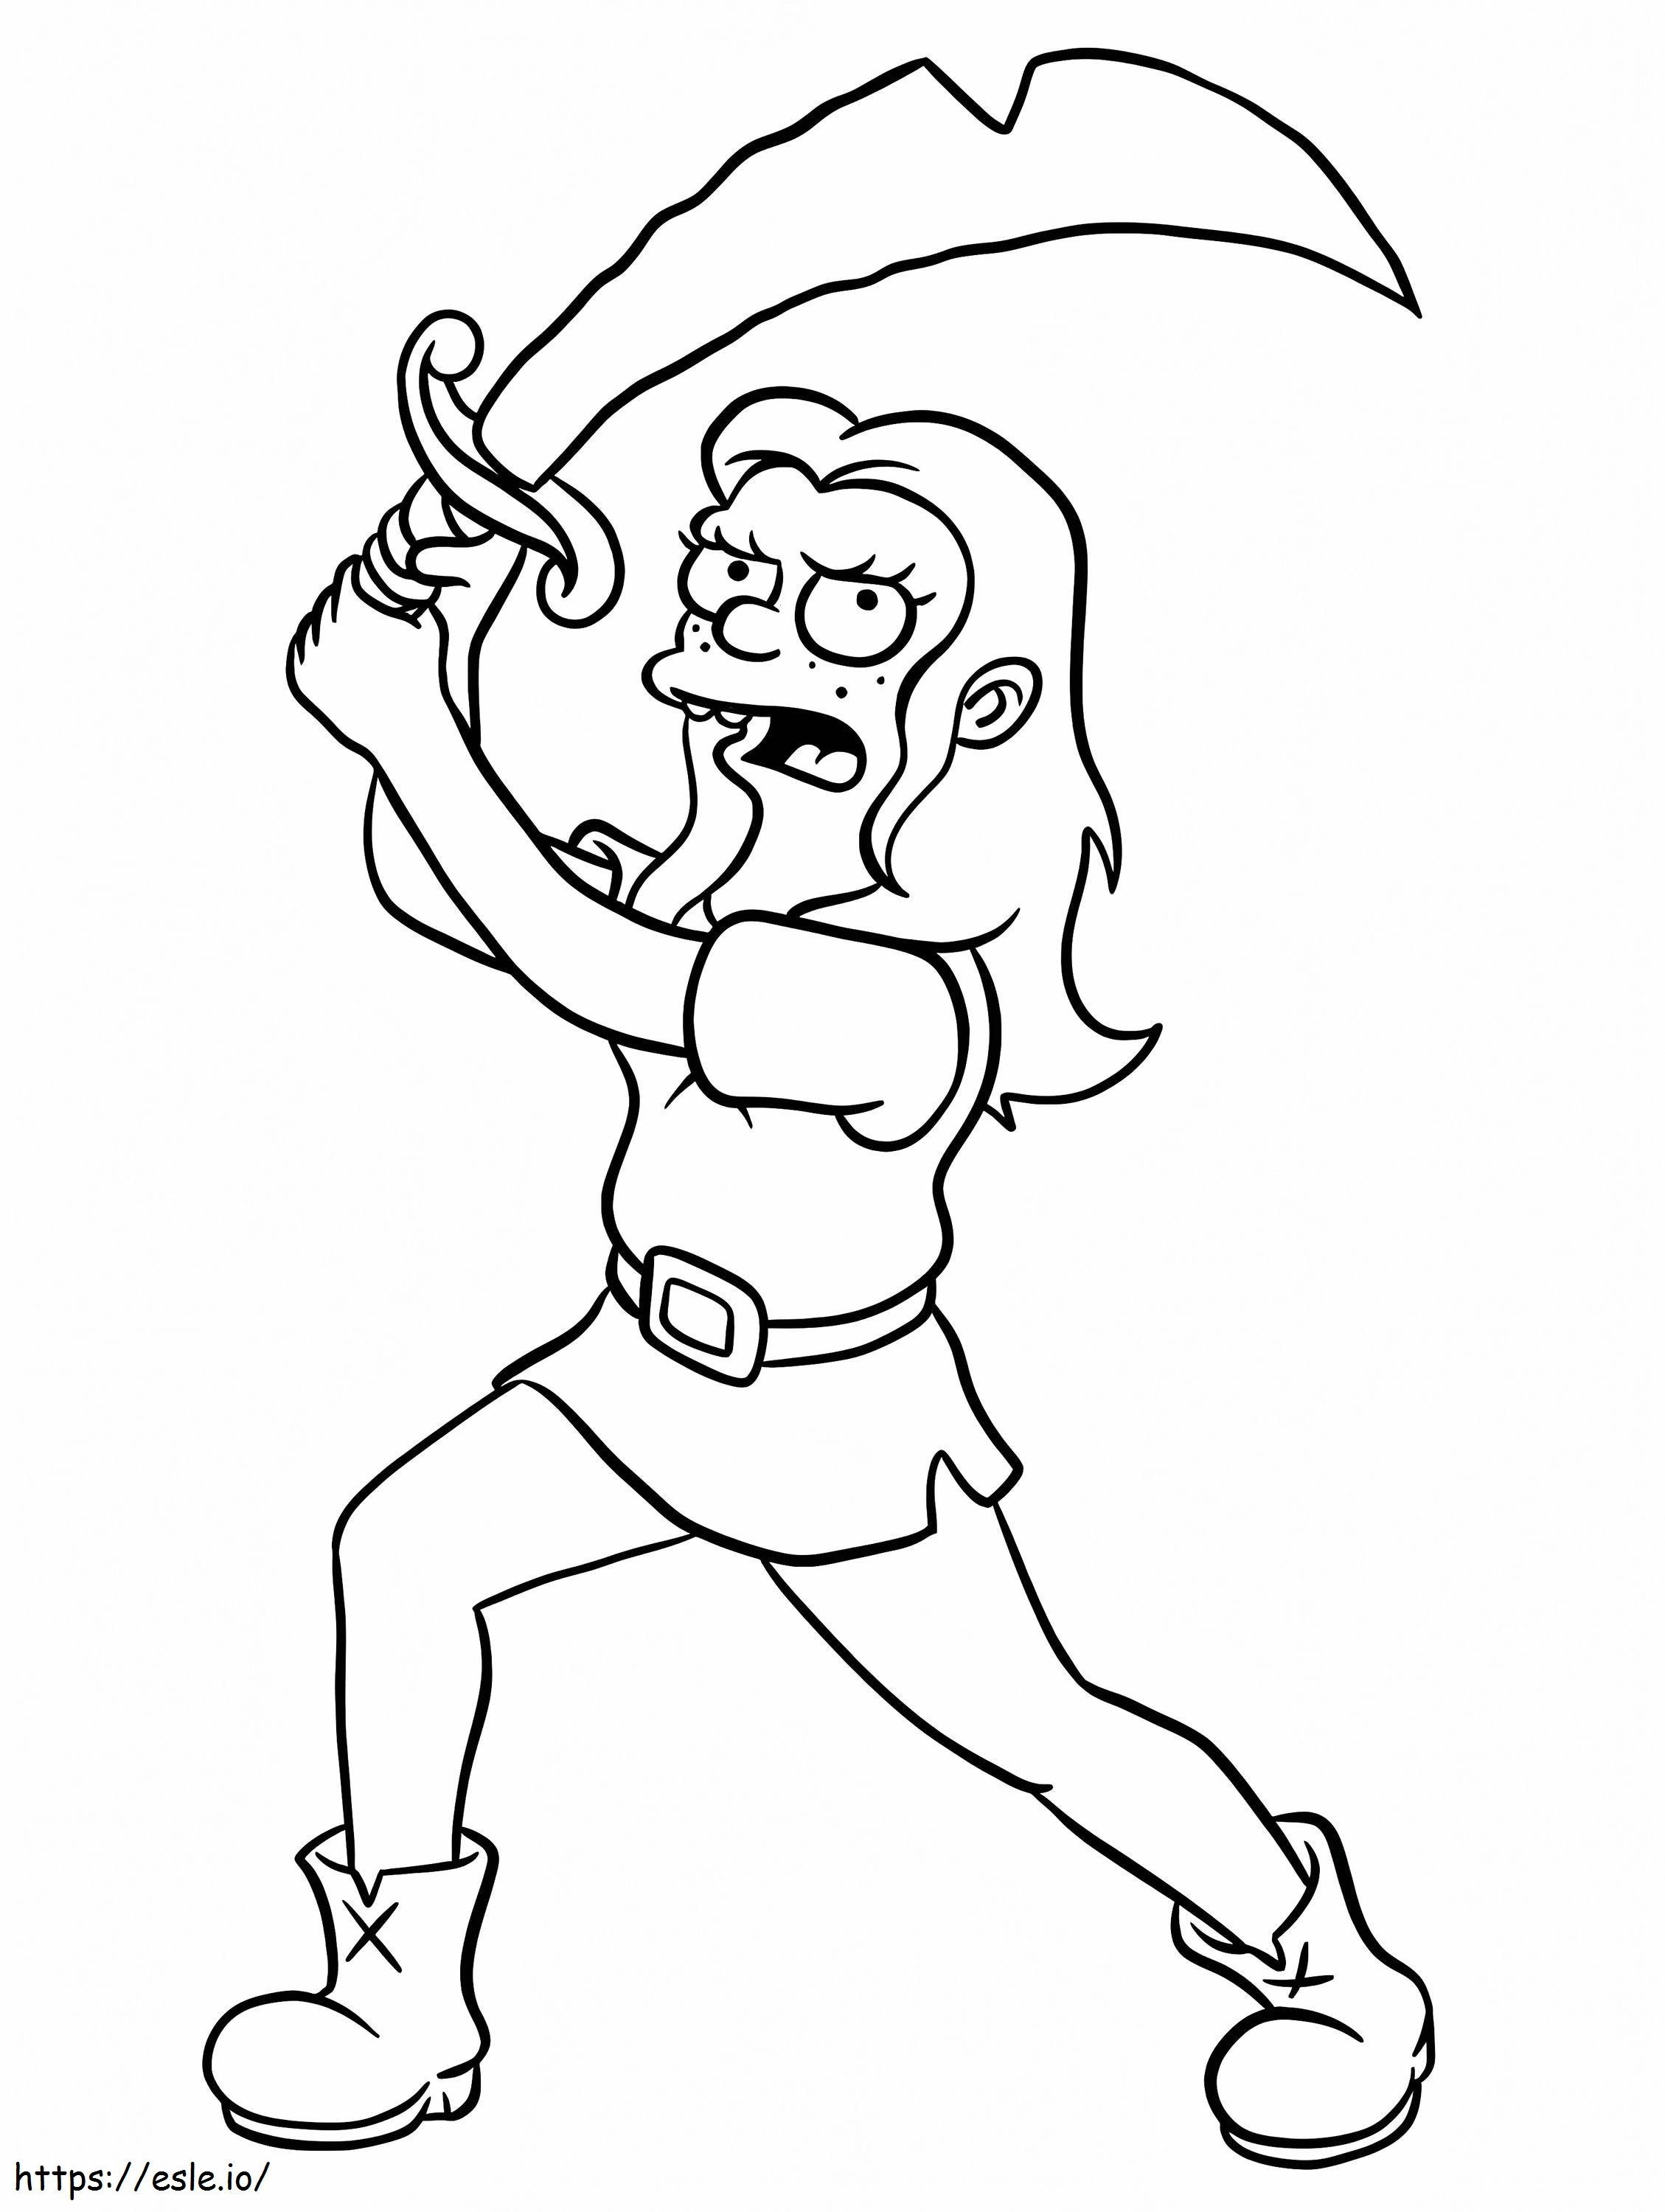 Queen Bean From Disenchantment coloring page